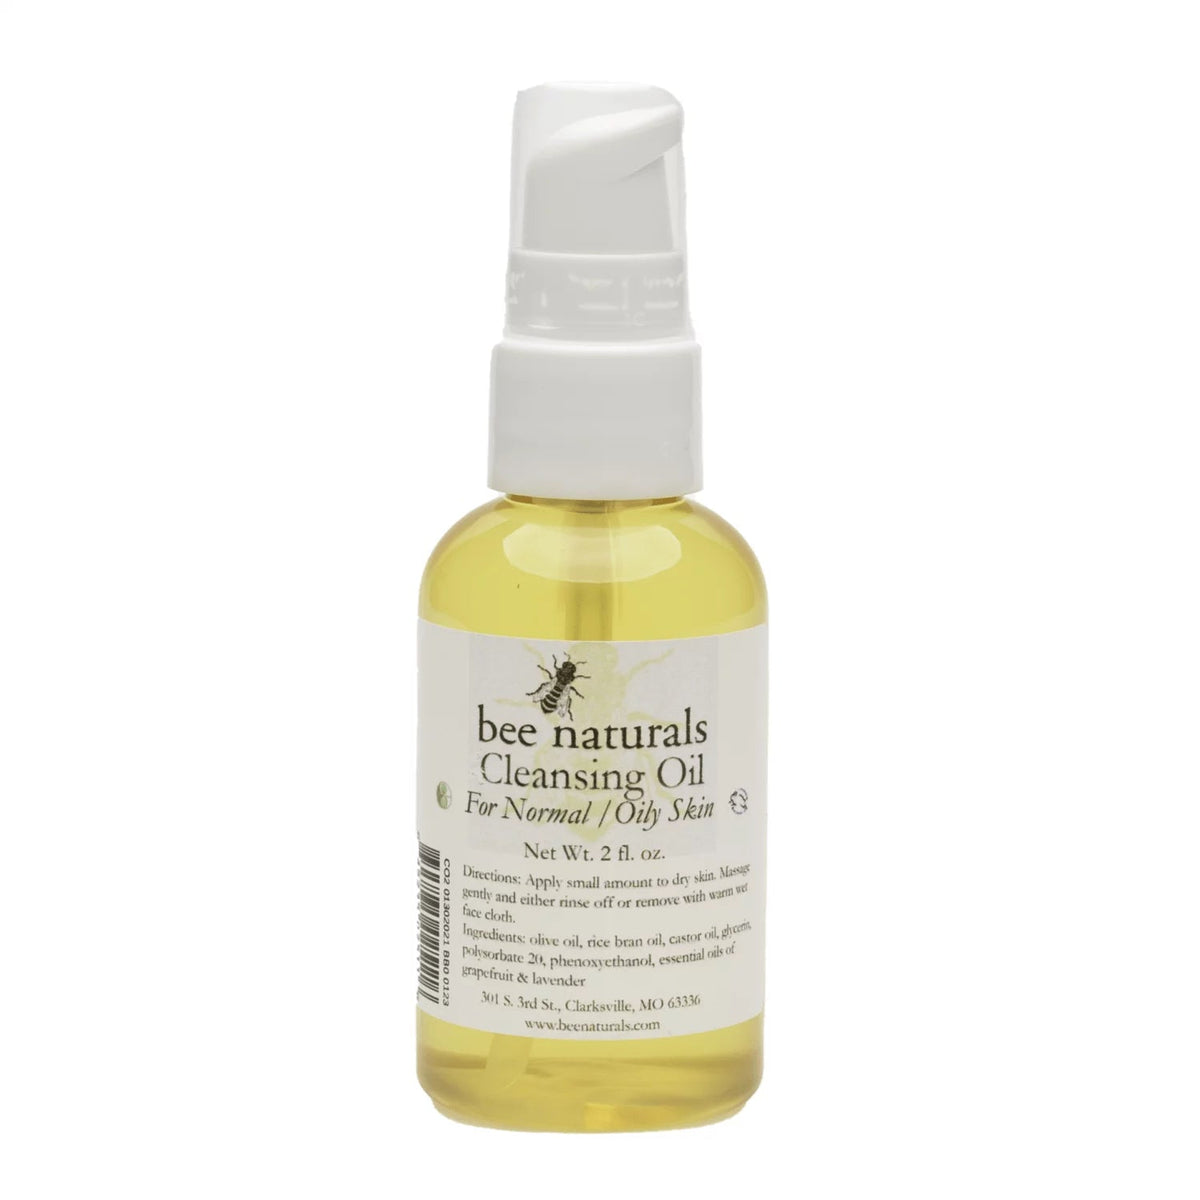 Cleansing Oil Makeup Remover For Normal and Oily Skin - Bee Naturals Store